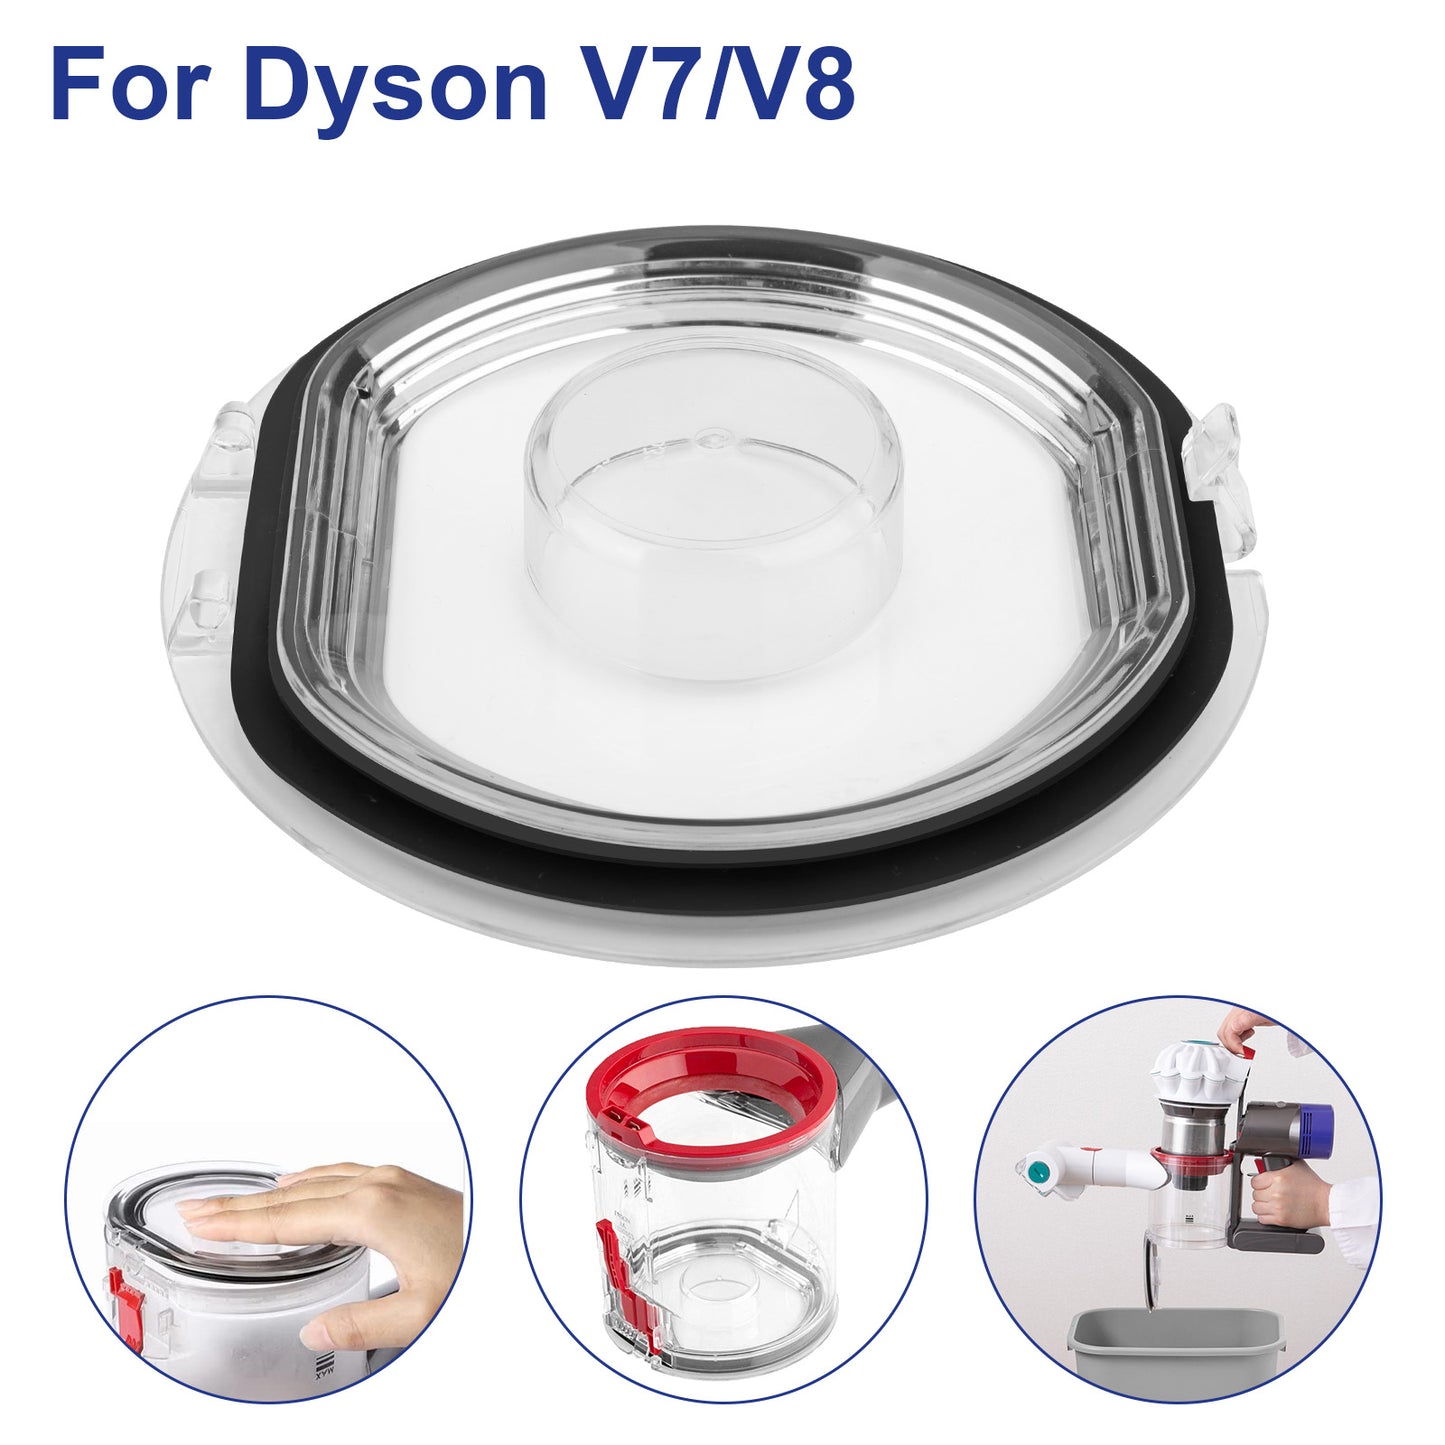 For Dyson V7/V8 Vacuum Cleaner BIN LID COVER REPLACEMENT